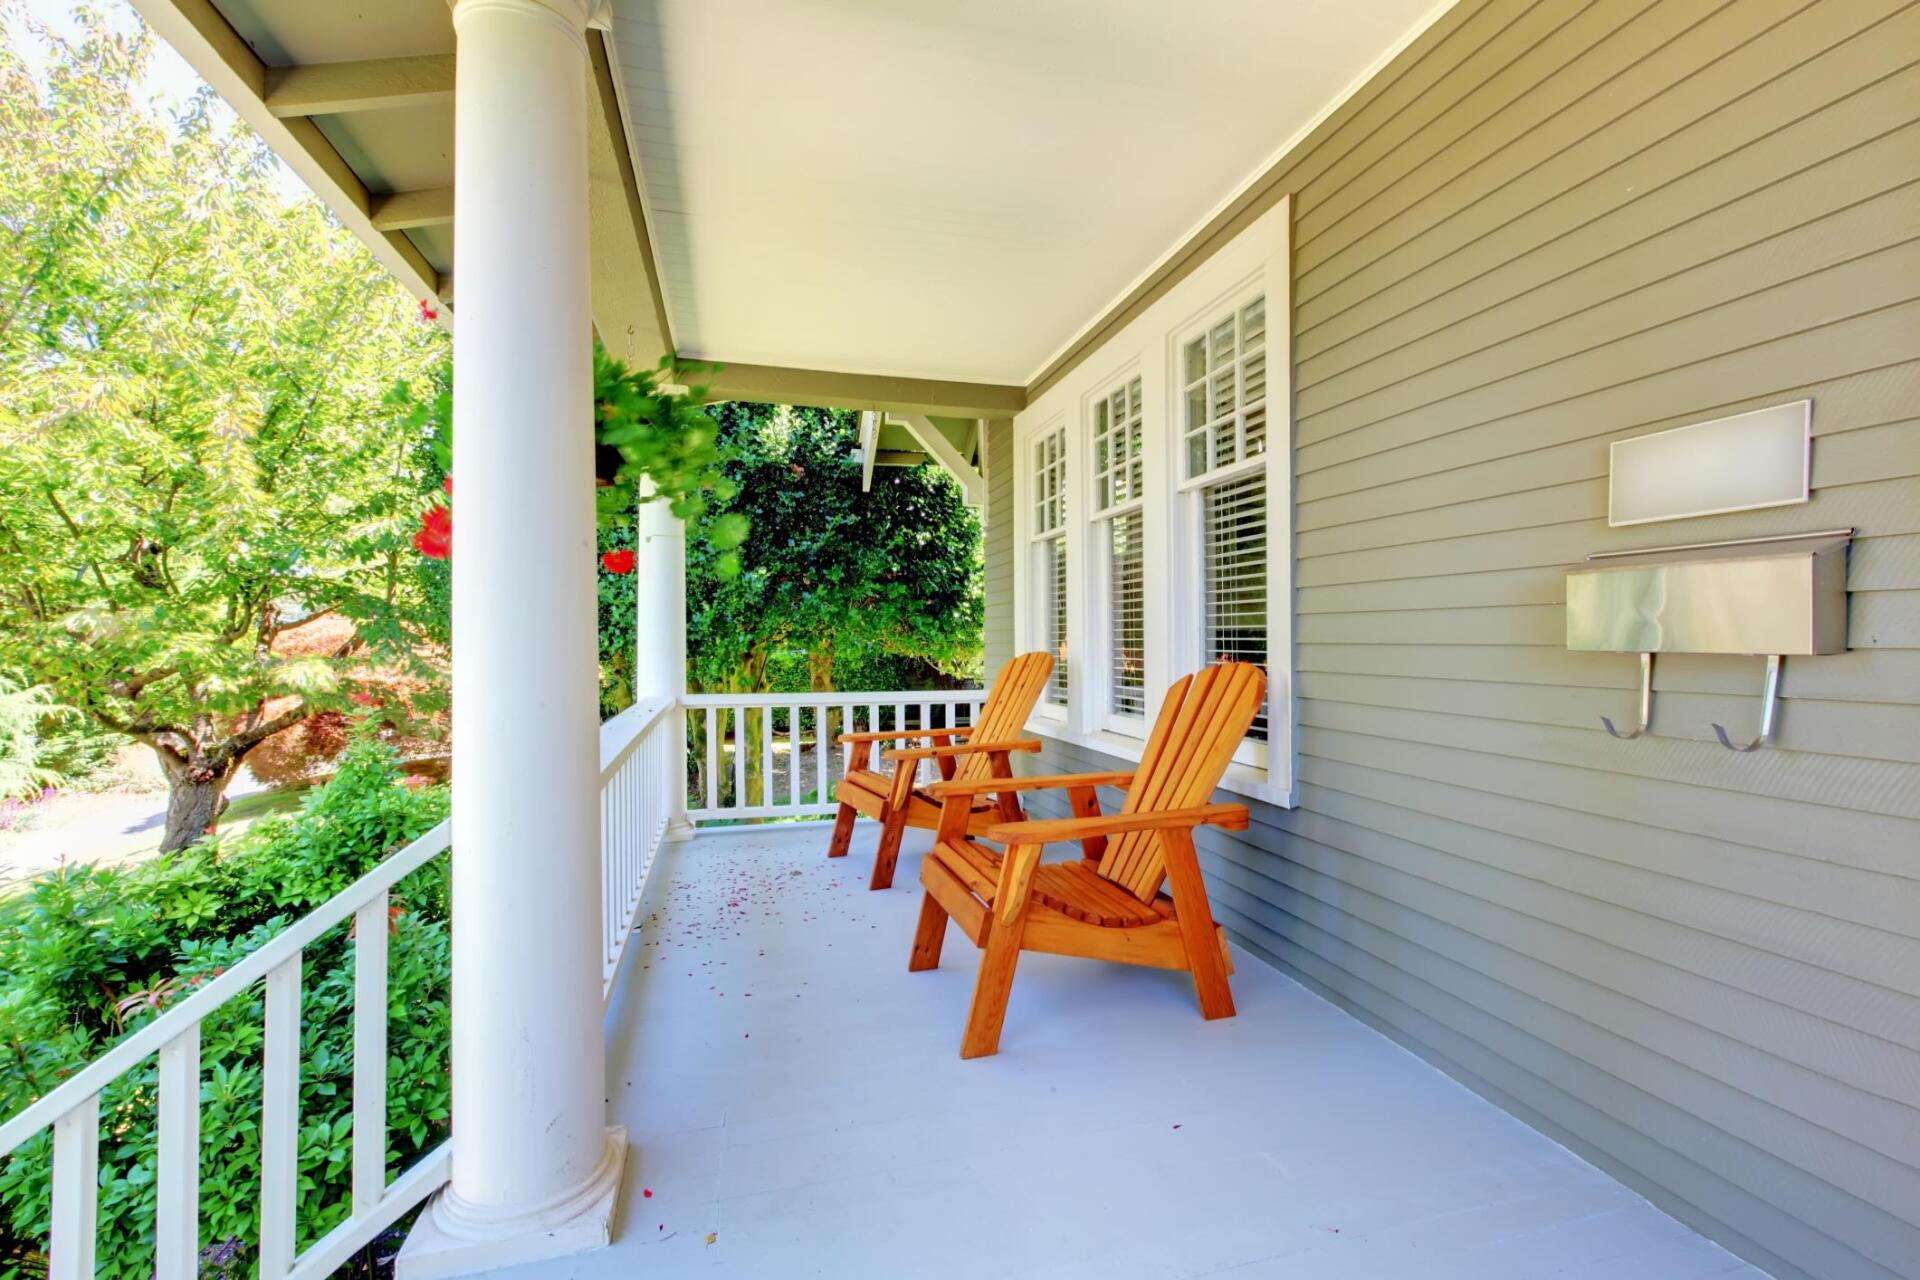 newly constructed porch with rocking chairs